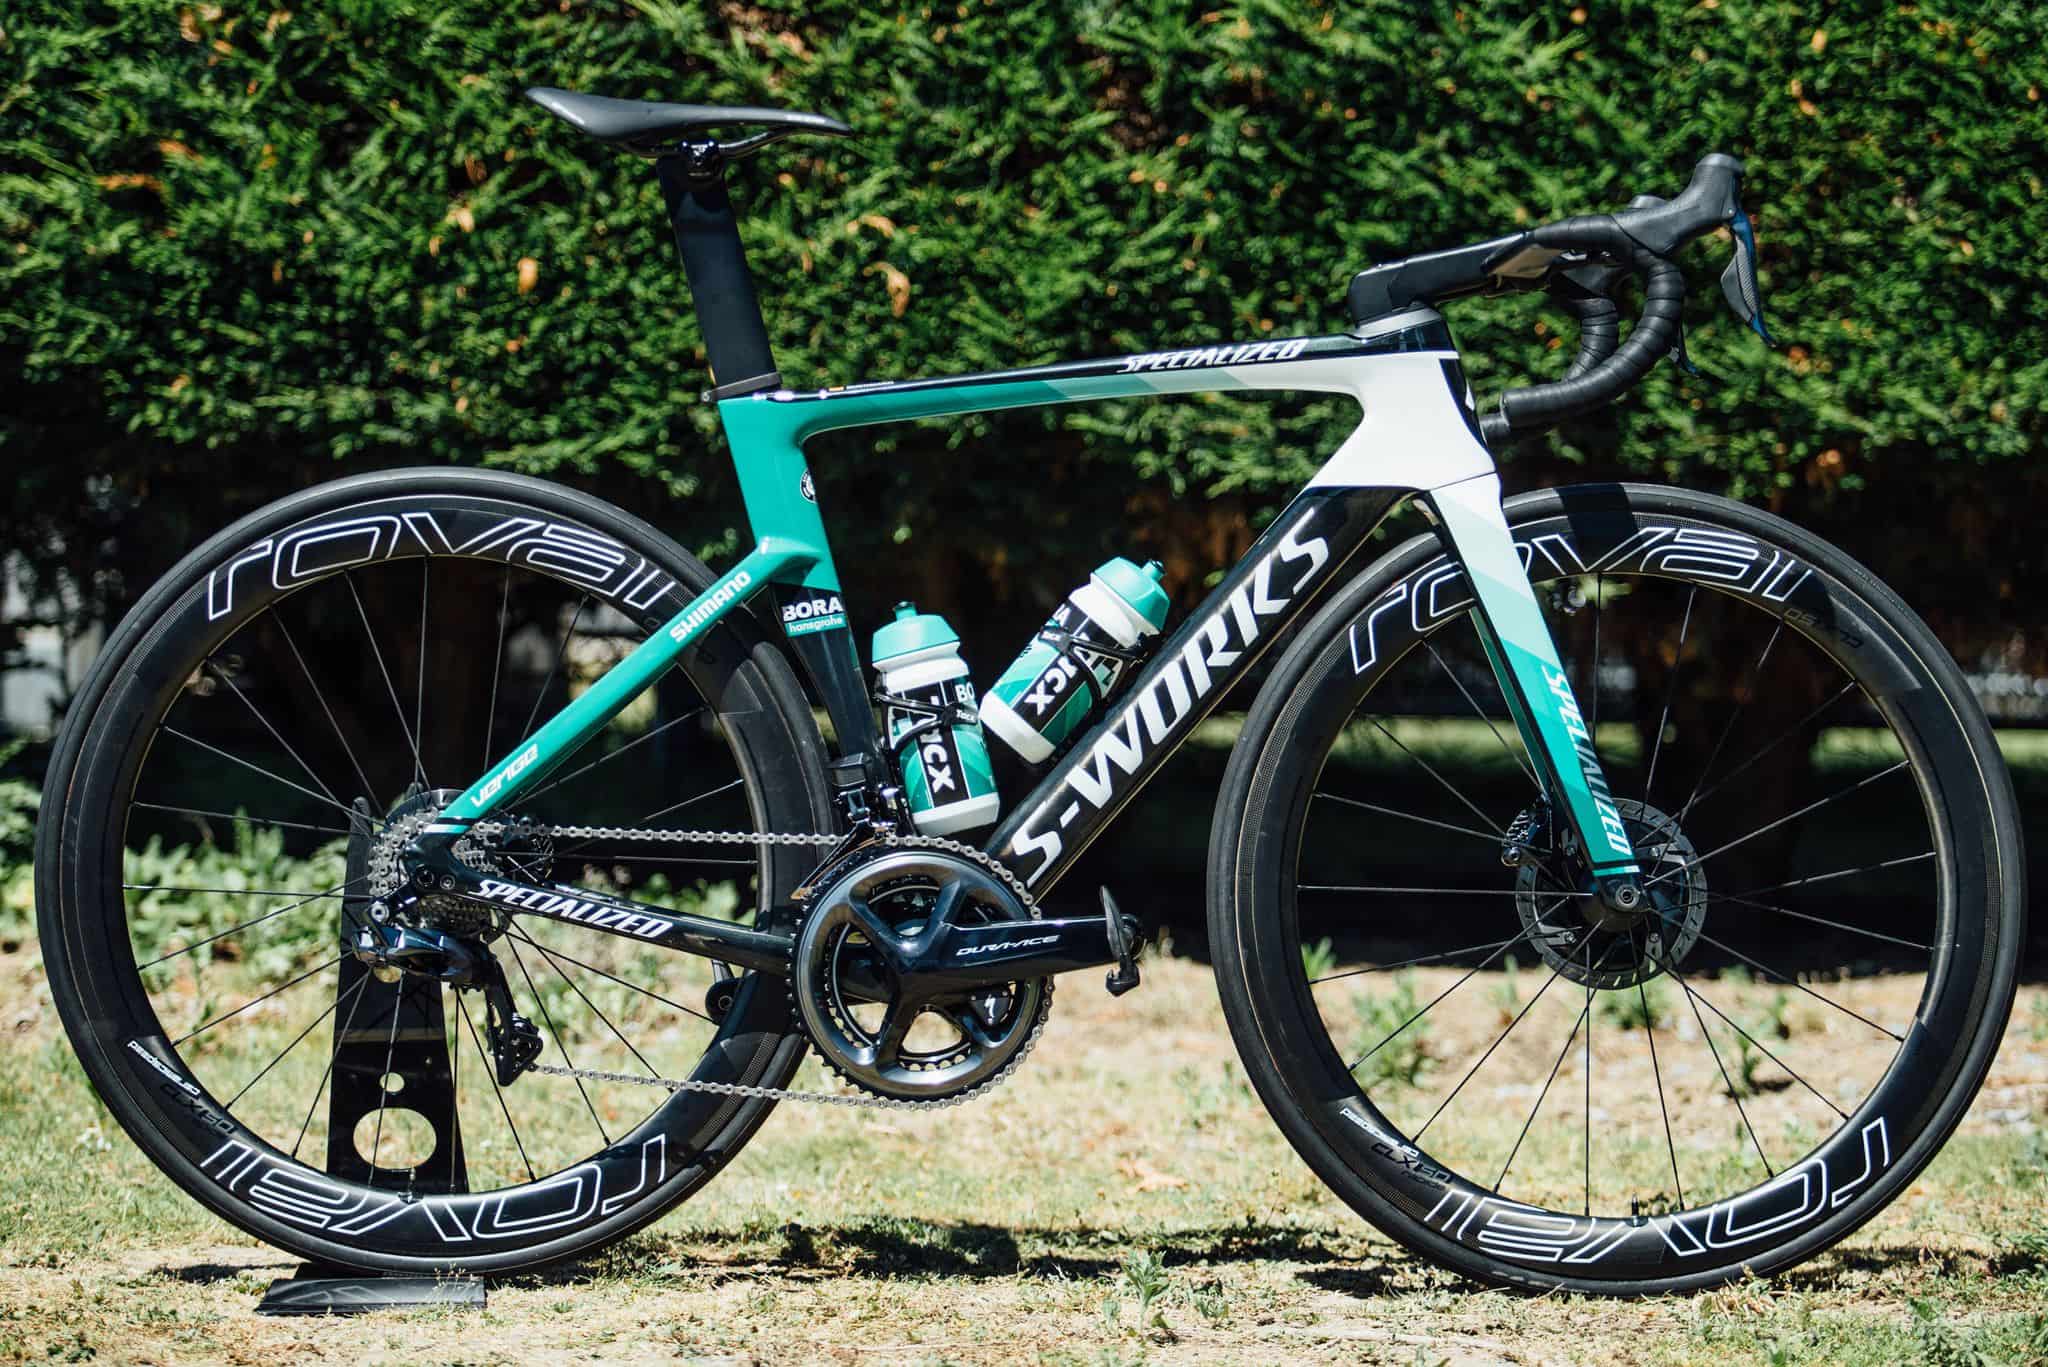 The Fastest Bikes Of The 2019 Tour de France! - Bicycling